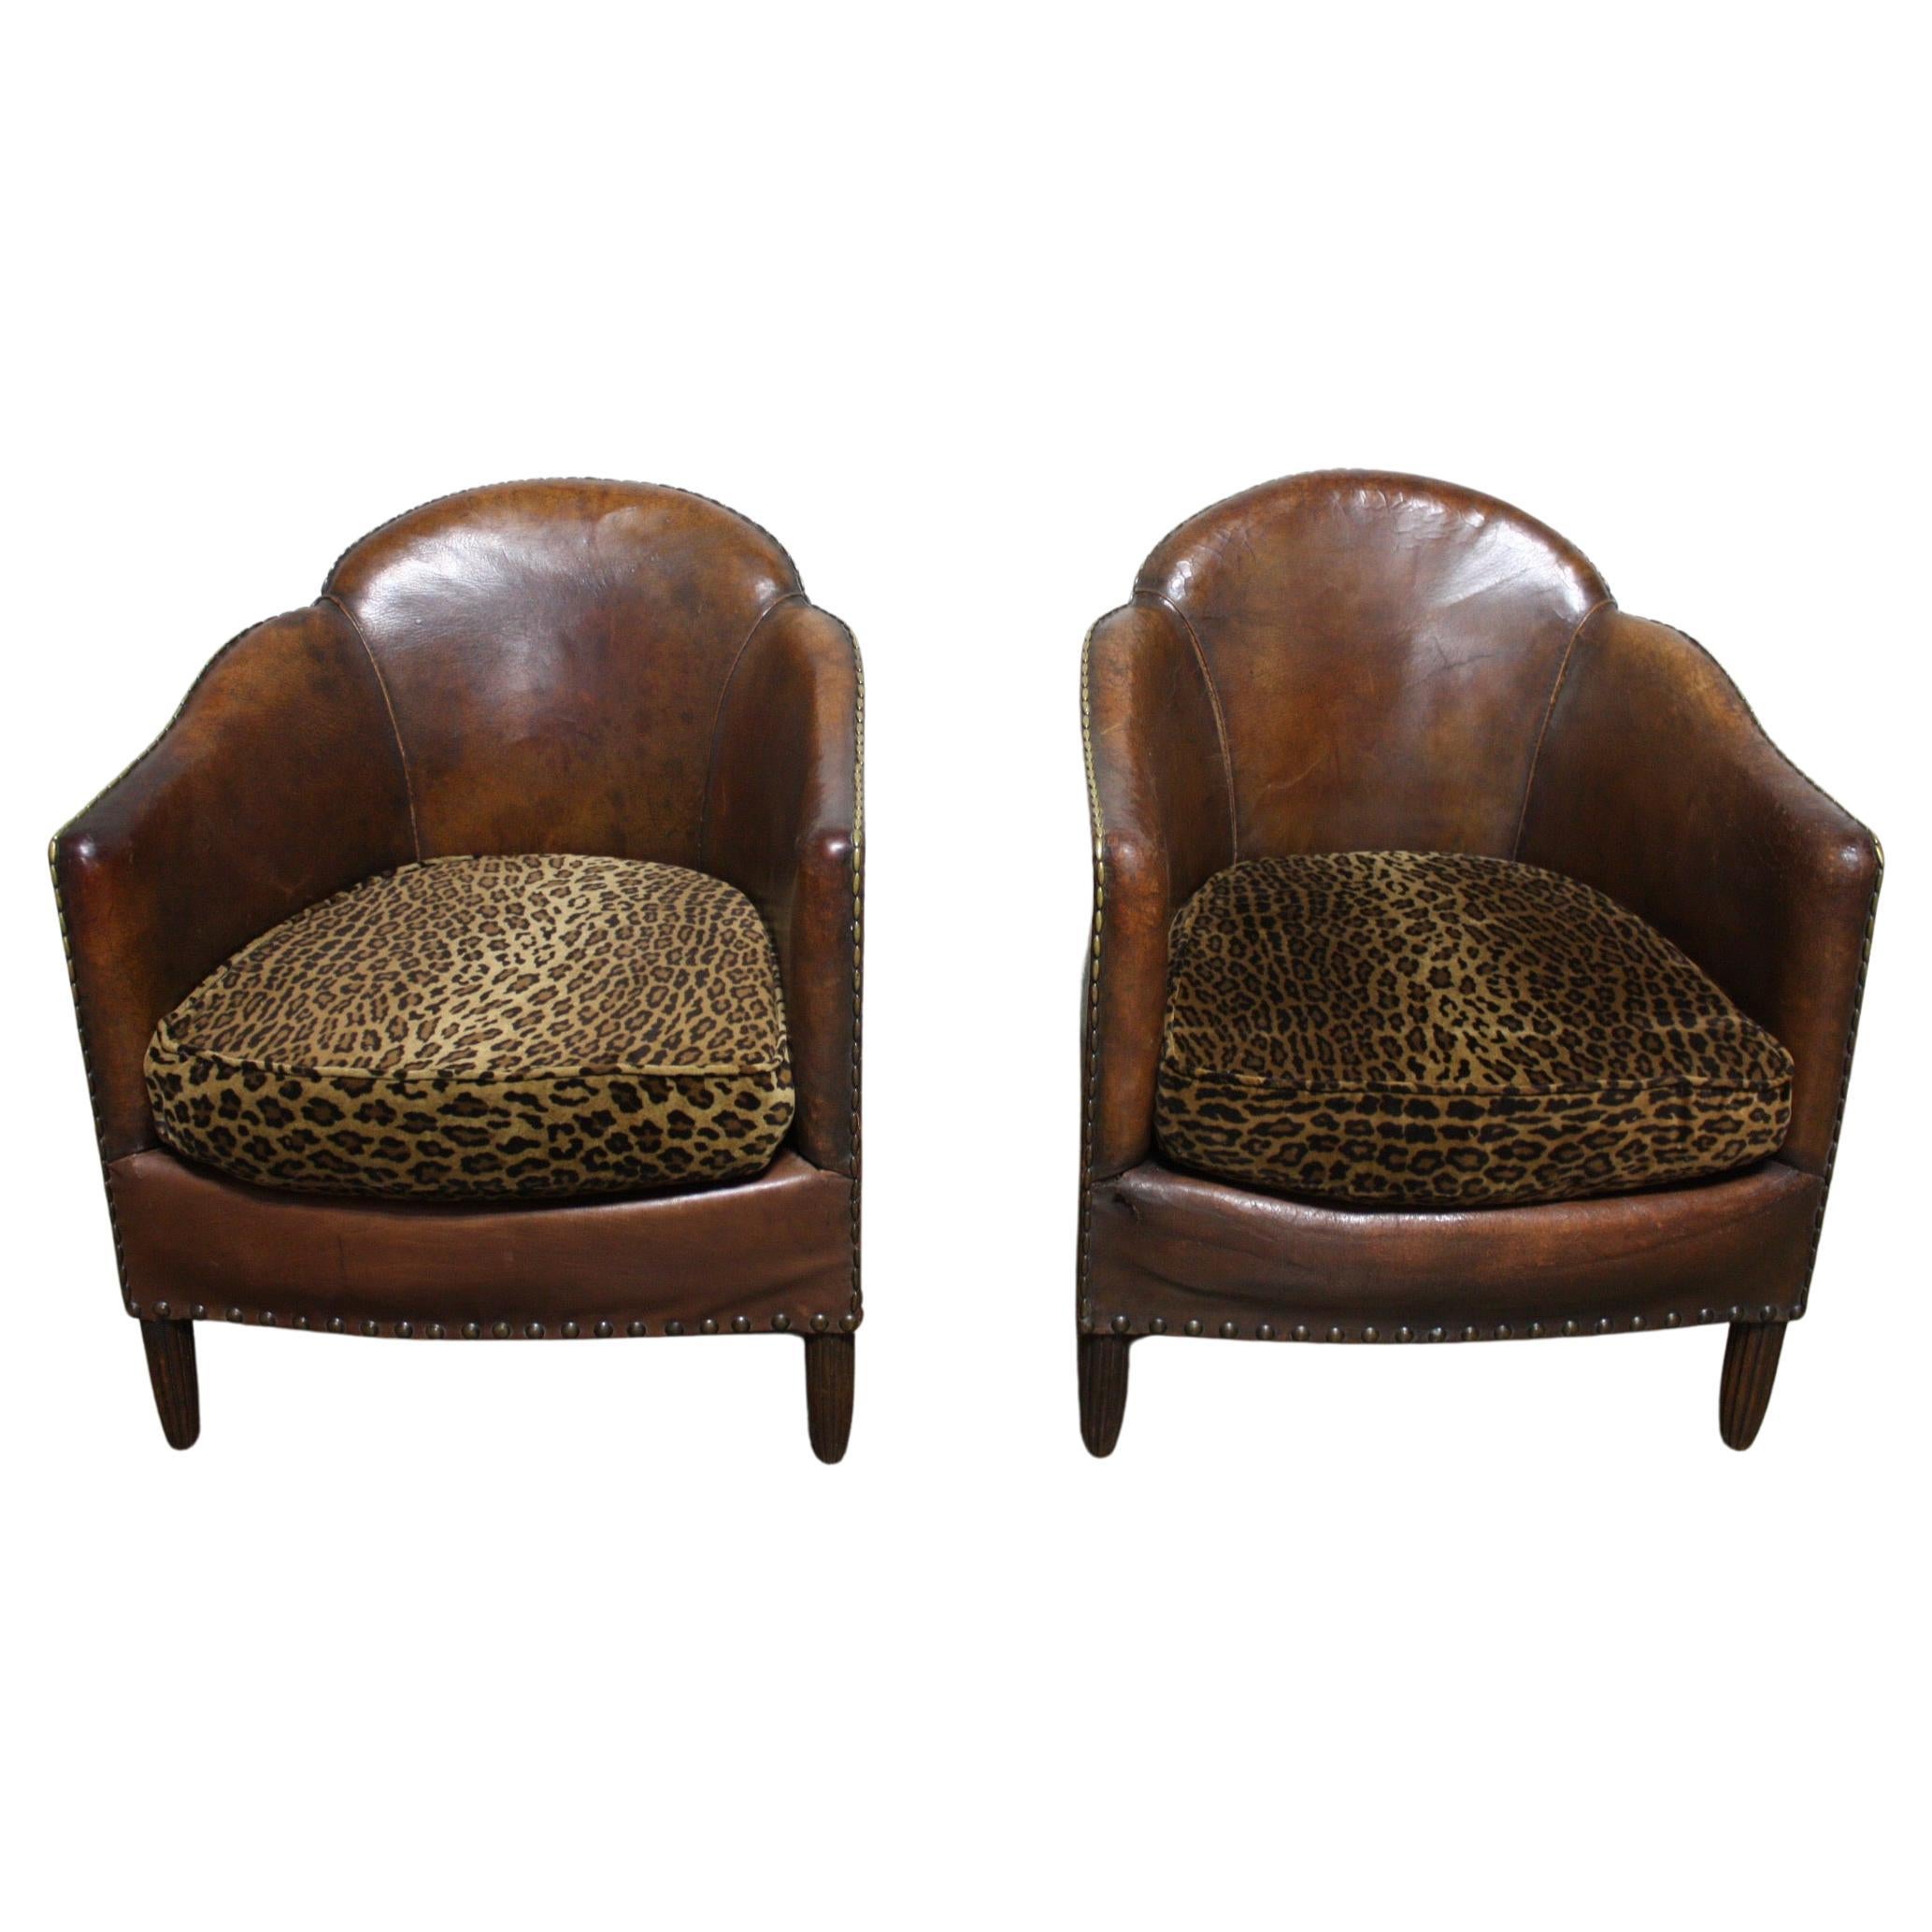 Pair of French Art Deco Club Chairs